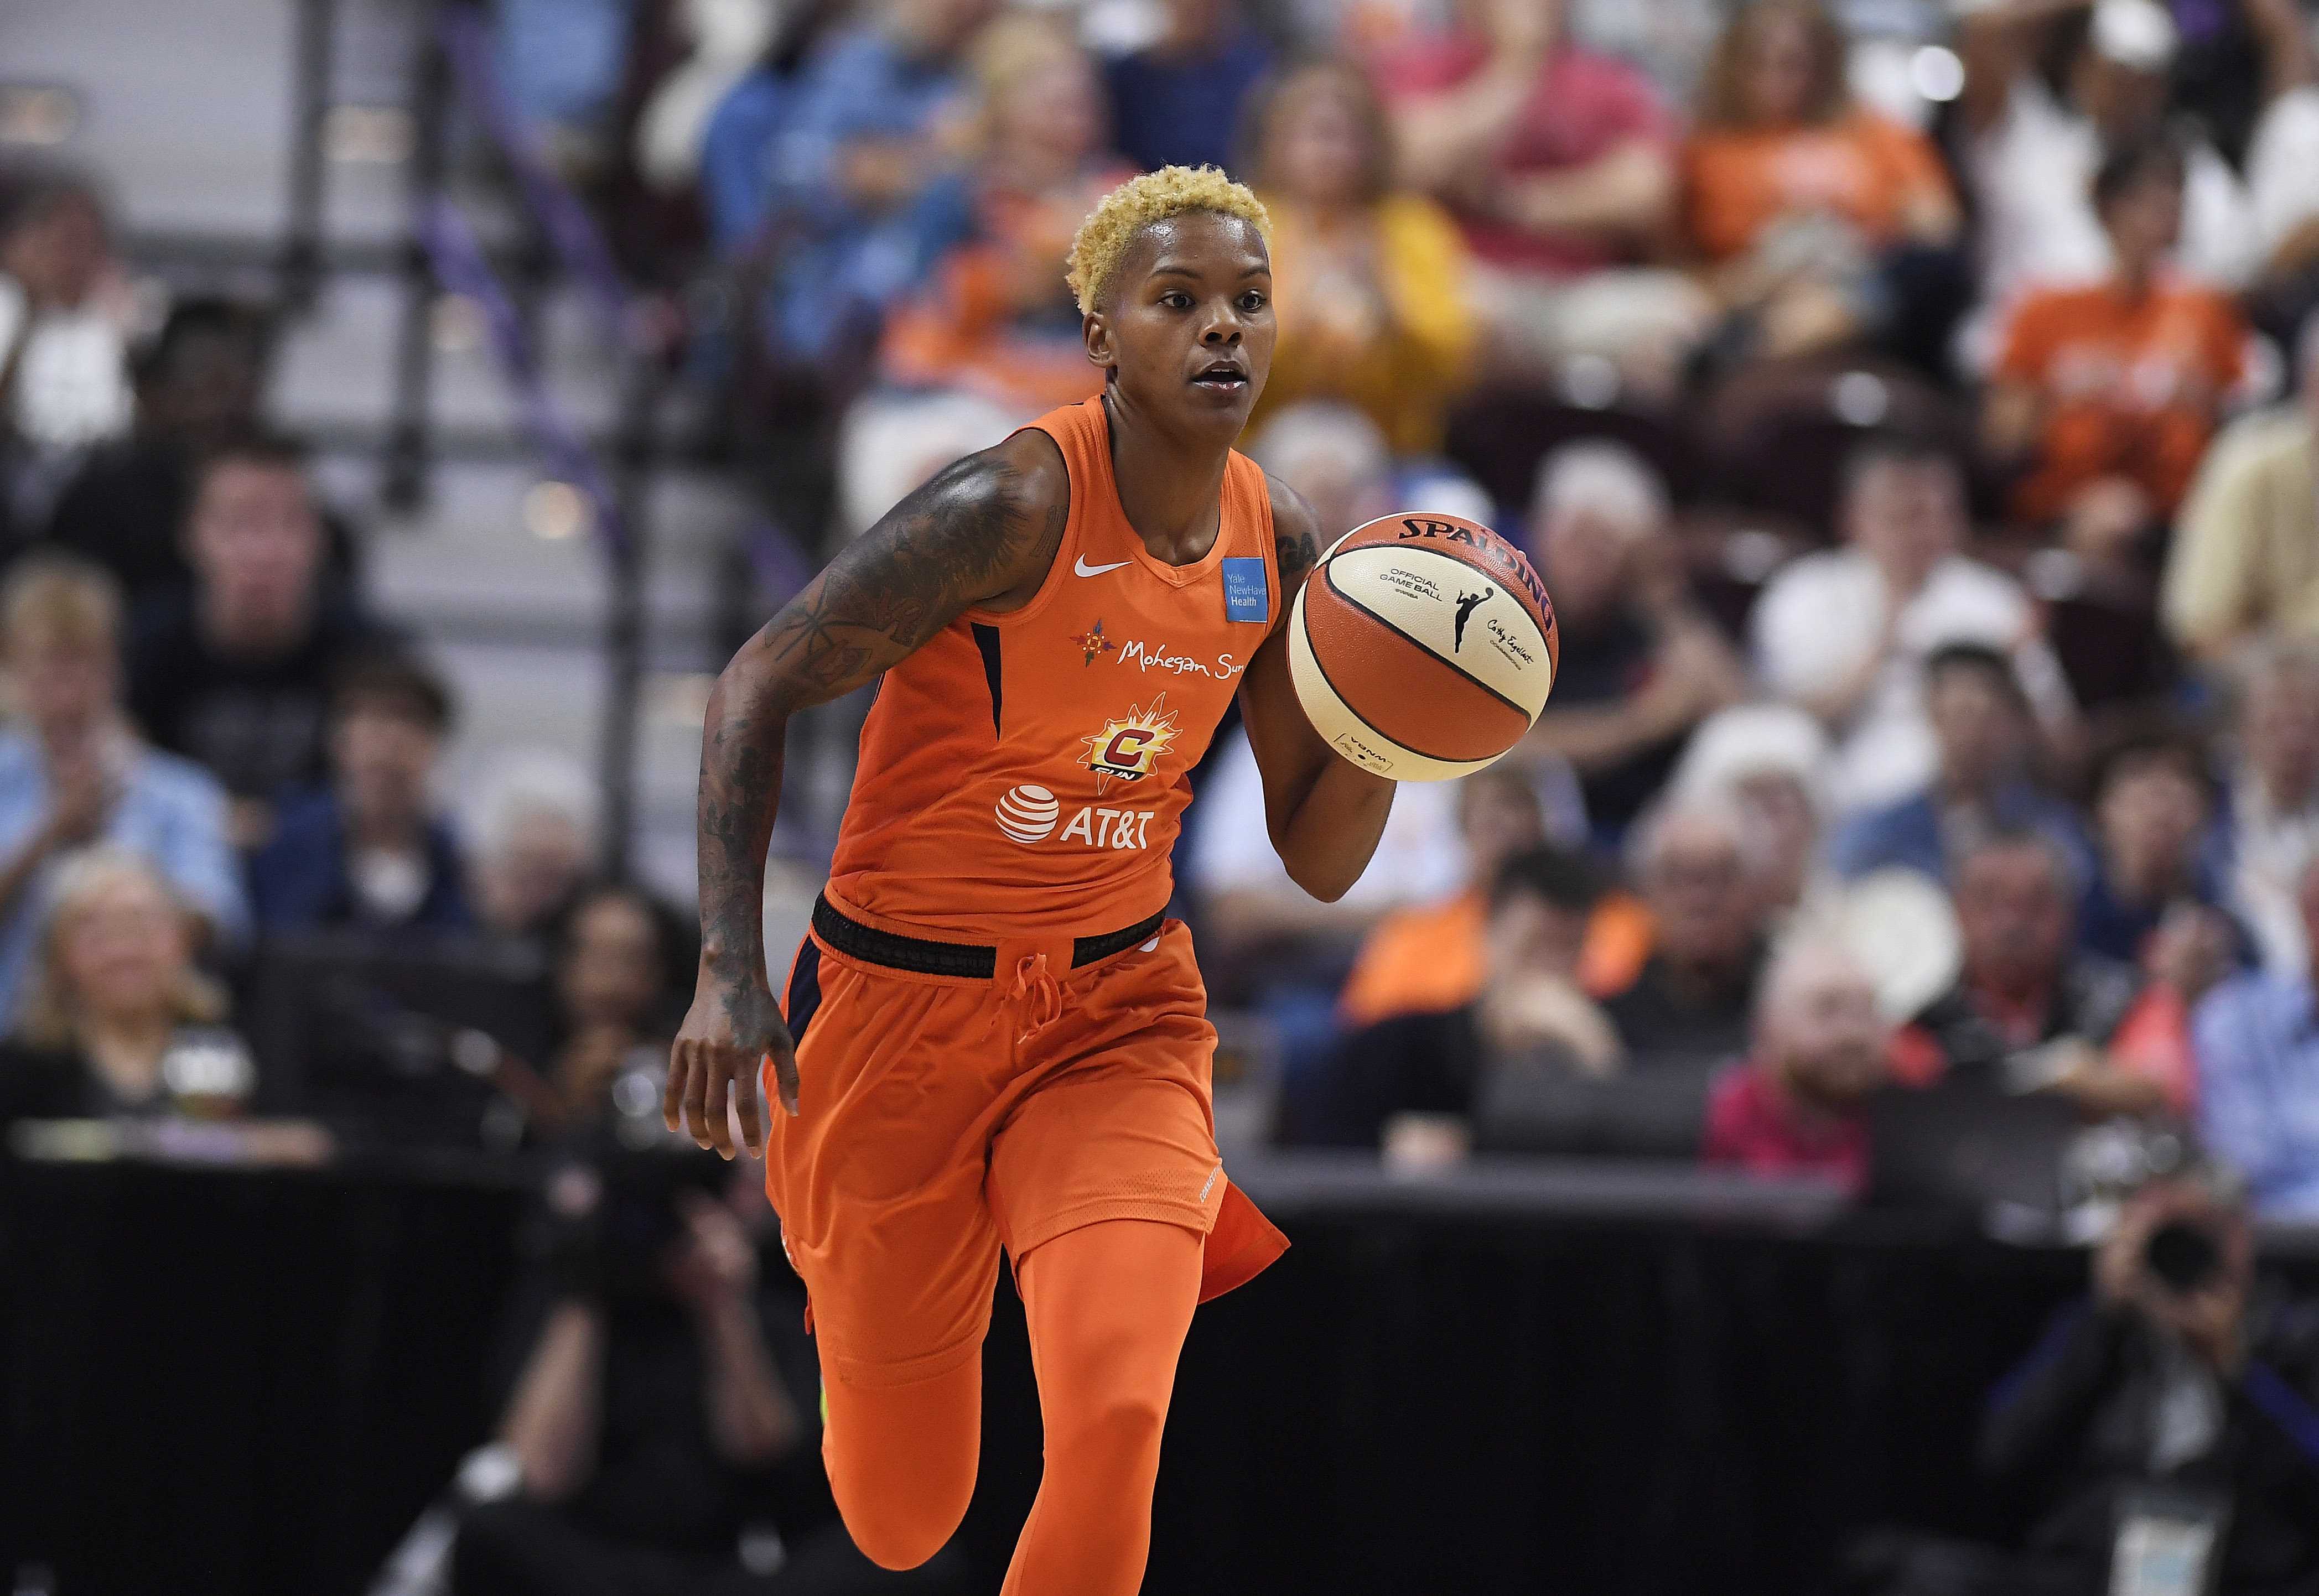  Courtney Williams is Exactly What the WNBA Needs